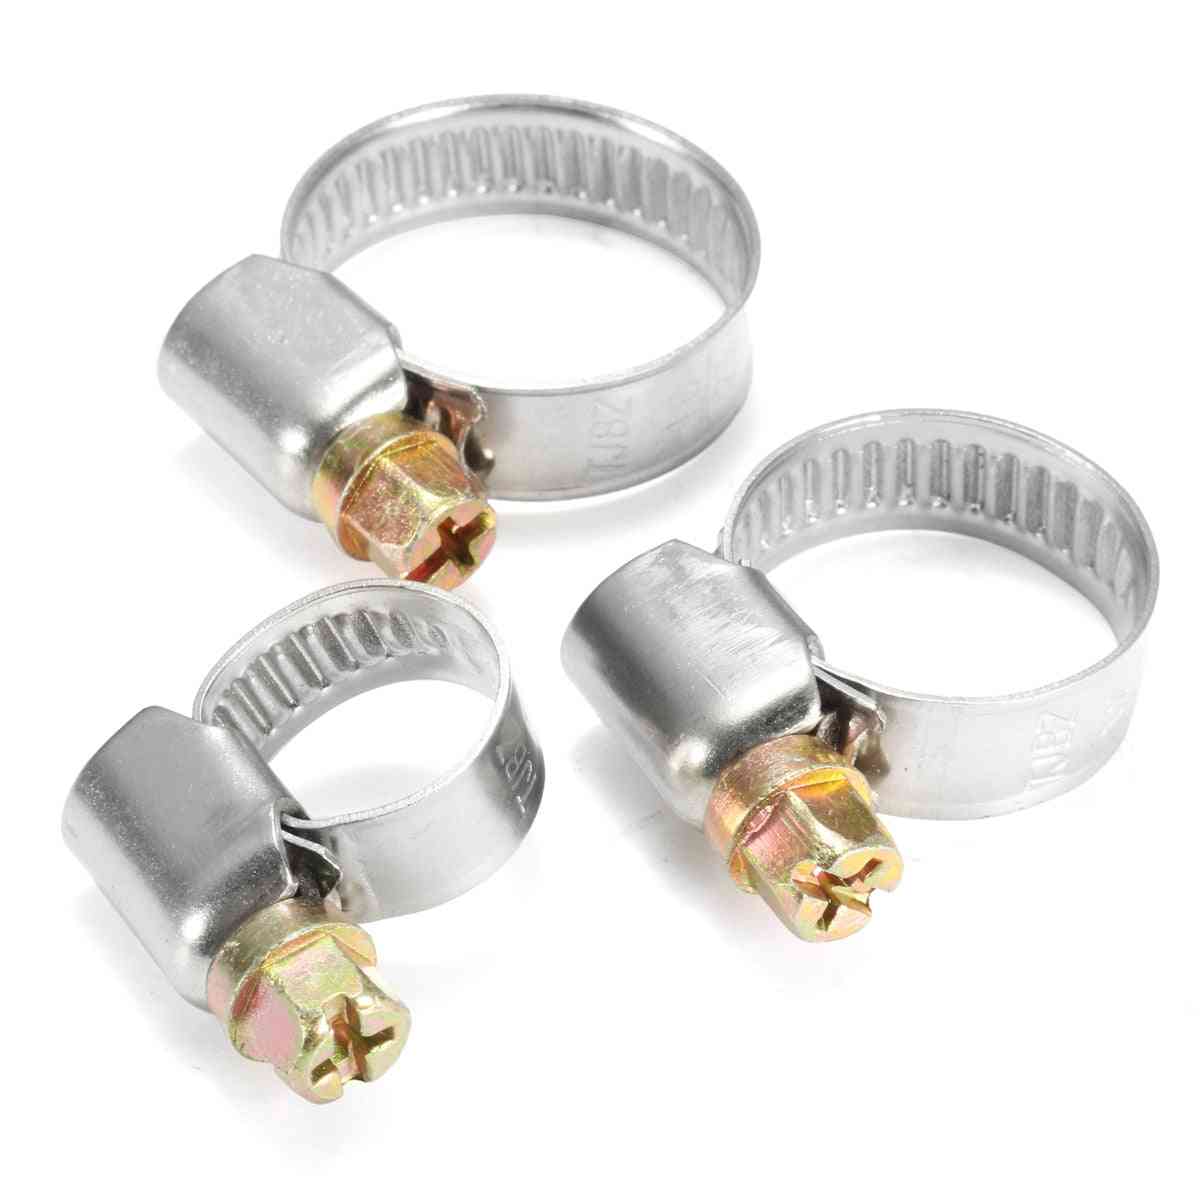 1/5pcs Pipe Clamps Genuine Jubilee Stainless Steel Hose Clips- Fuel Hose Pipe Clamps, Worm Drive Durable Anti-oxidation